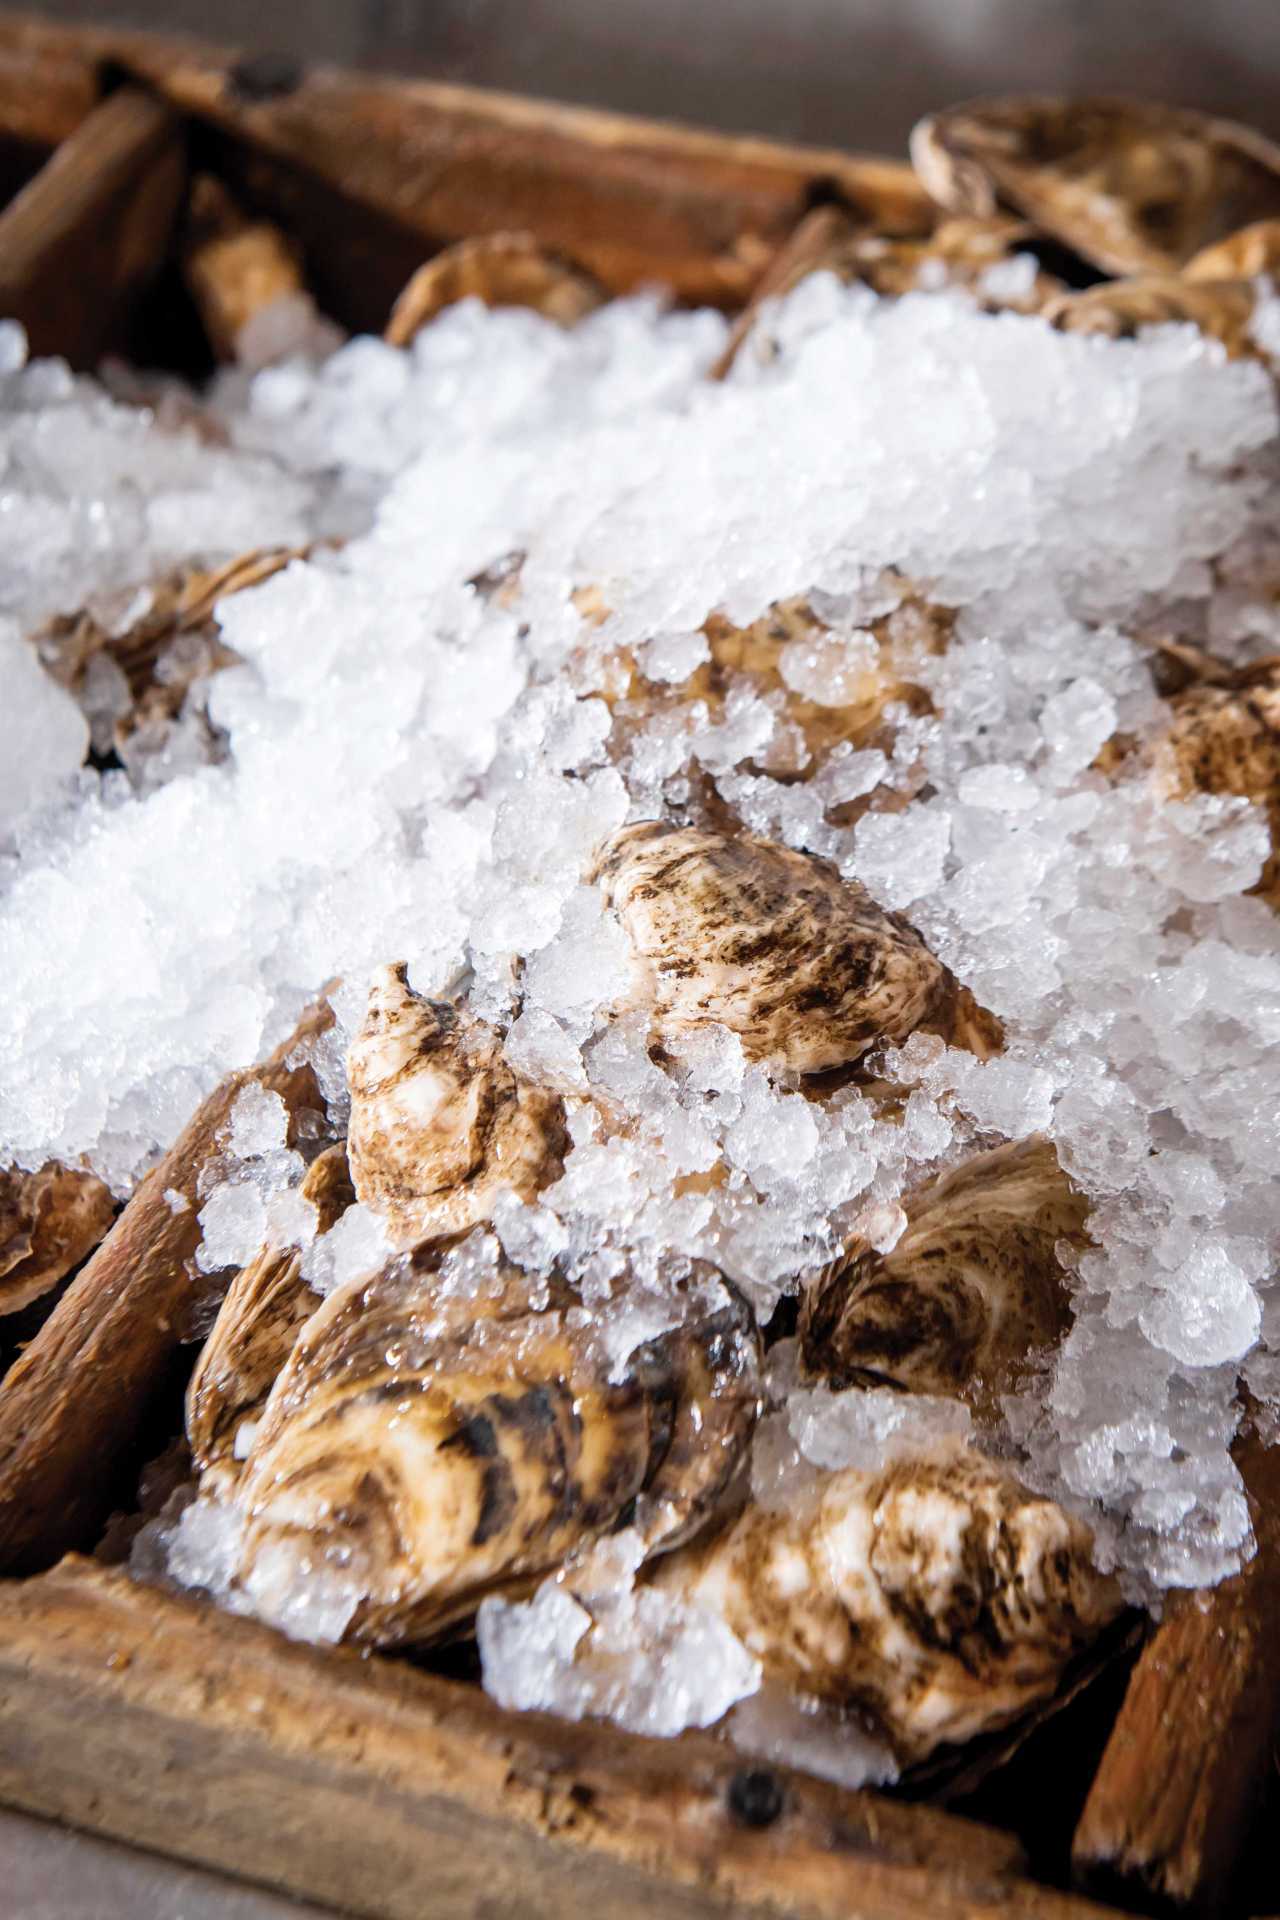 Restaurant supply chains: oysters from Oyster Boy